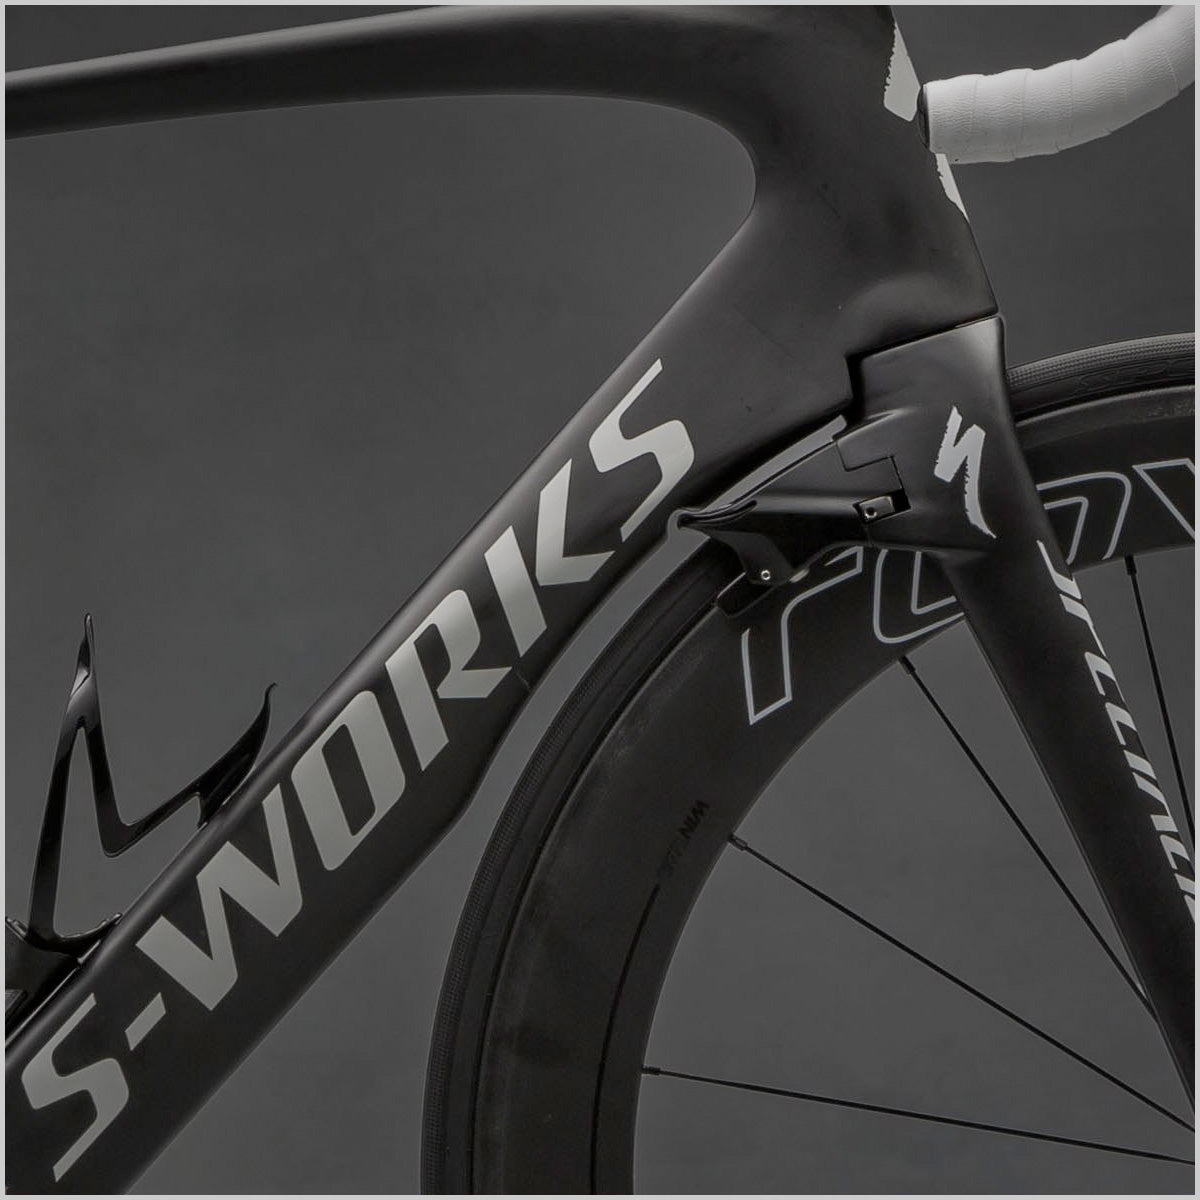 Bicycle Shop Eastern Suburbs Sydney. Specialized, Giant, Cervelo, Focus bicycles Sydney dealer